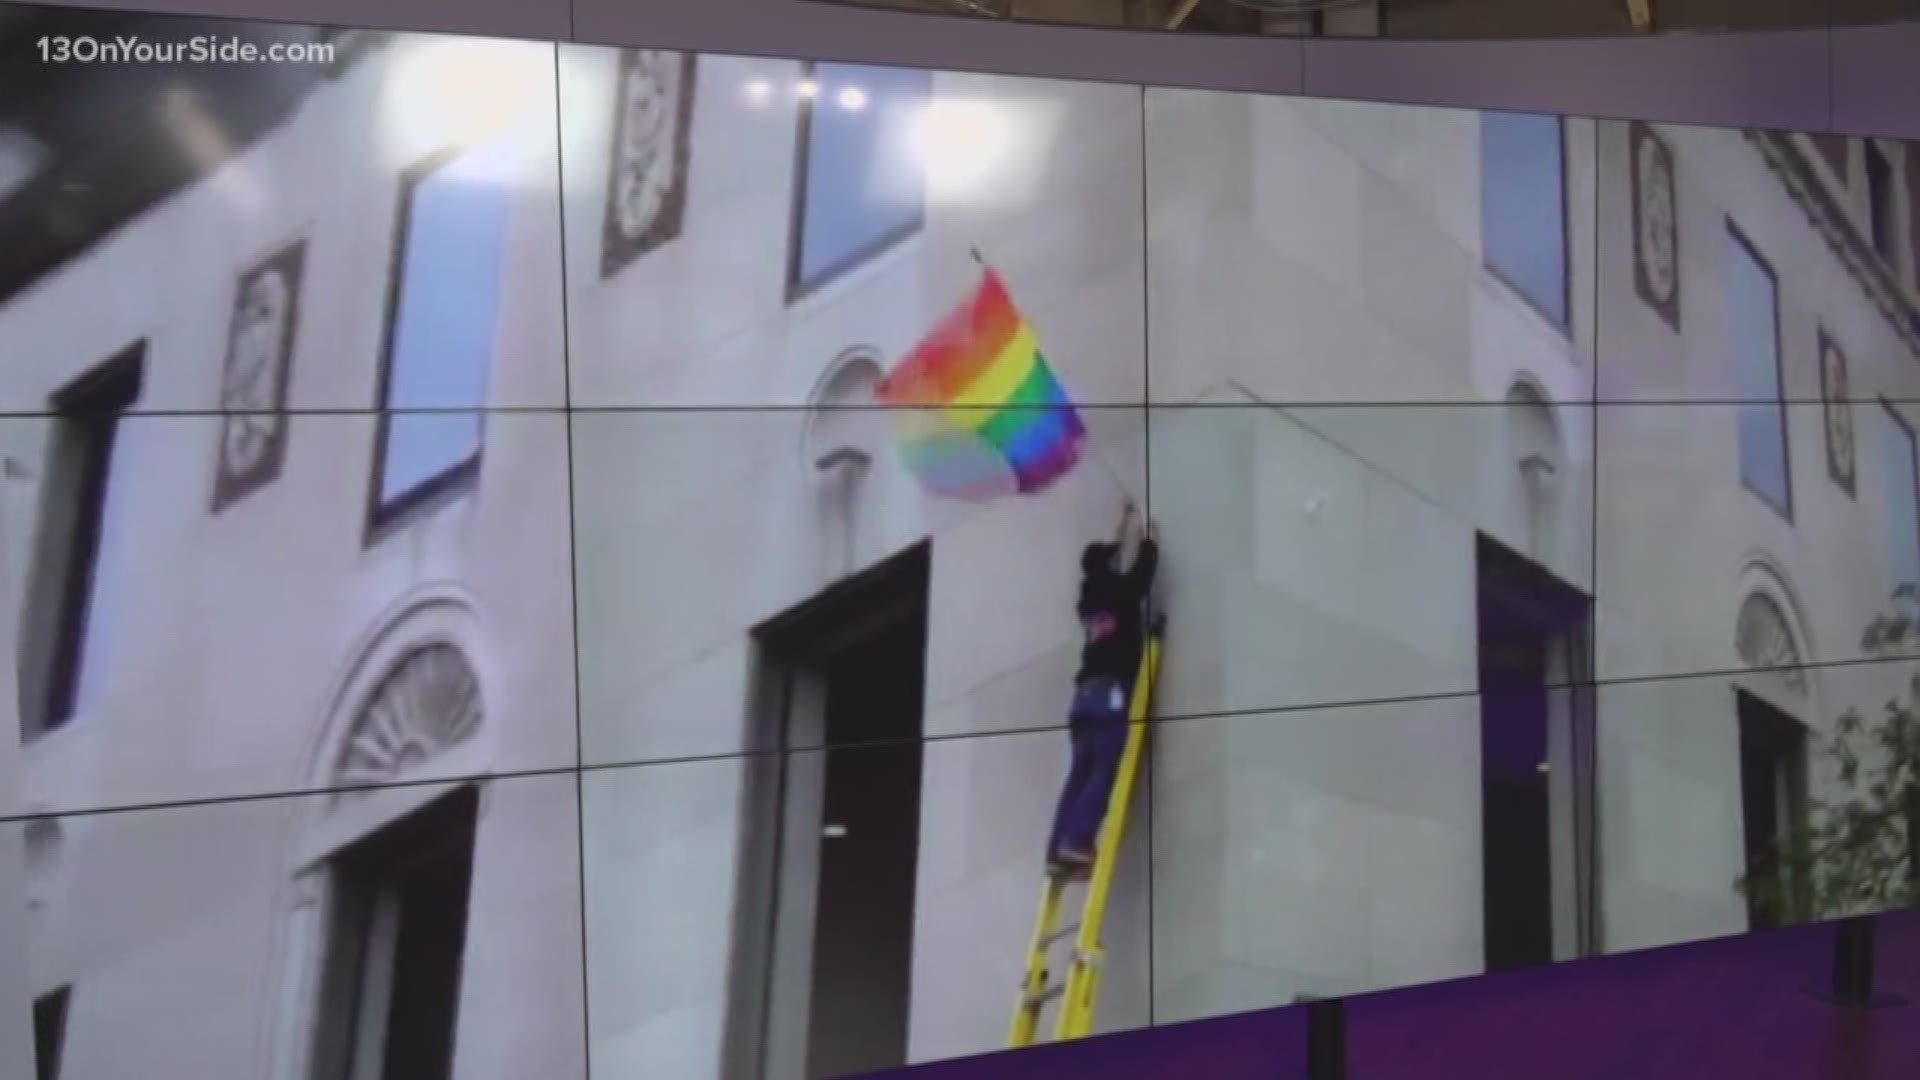 Pride flags fly at state building for the first time